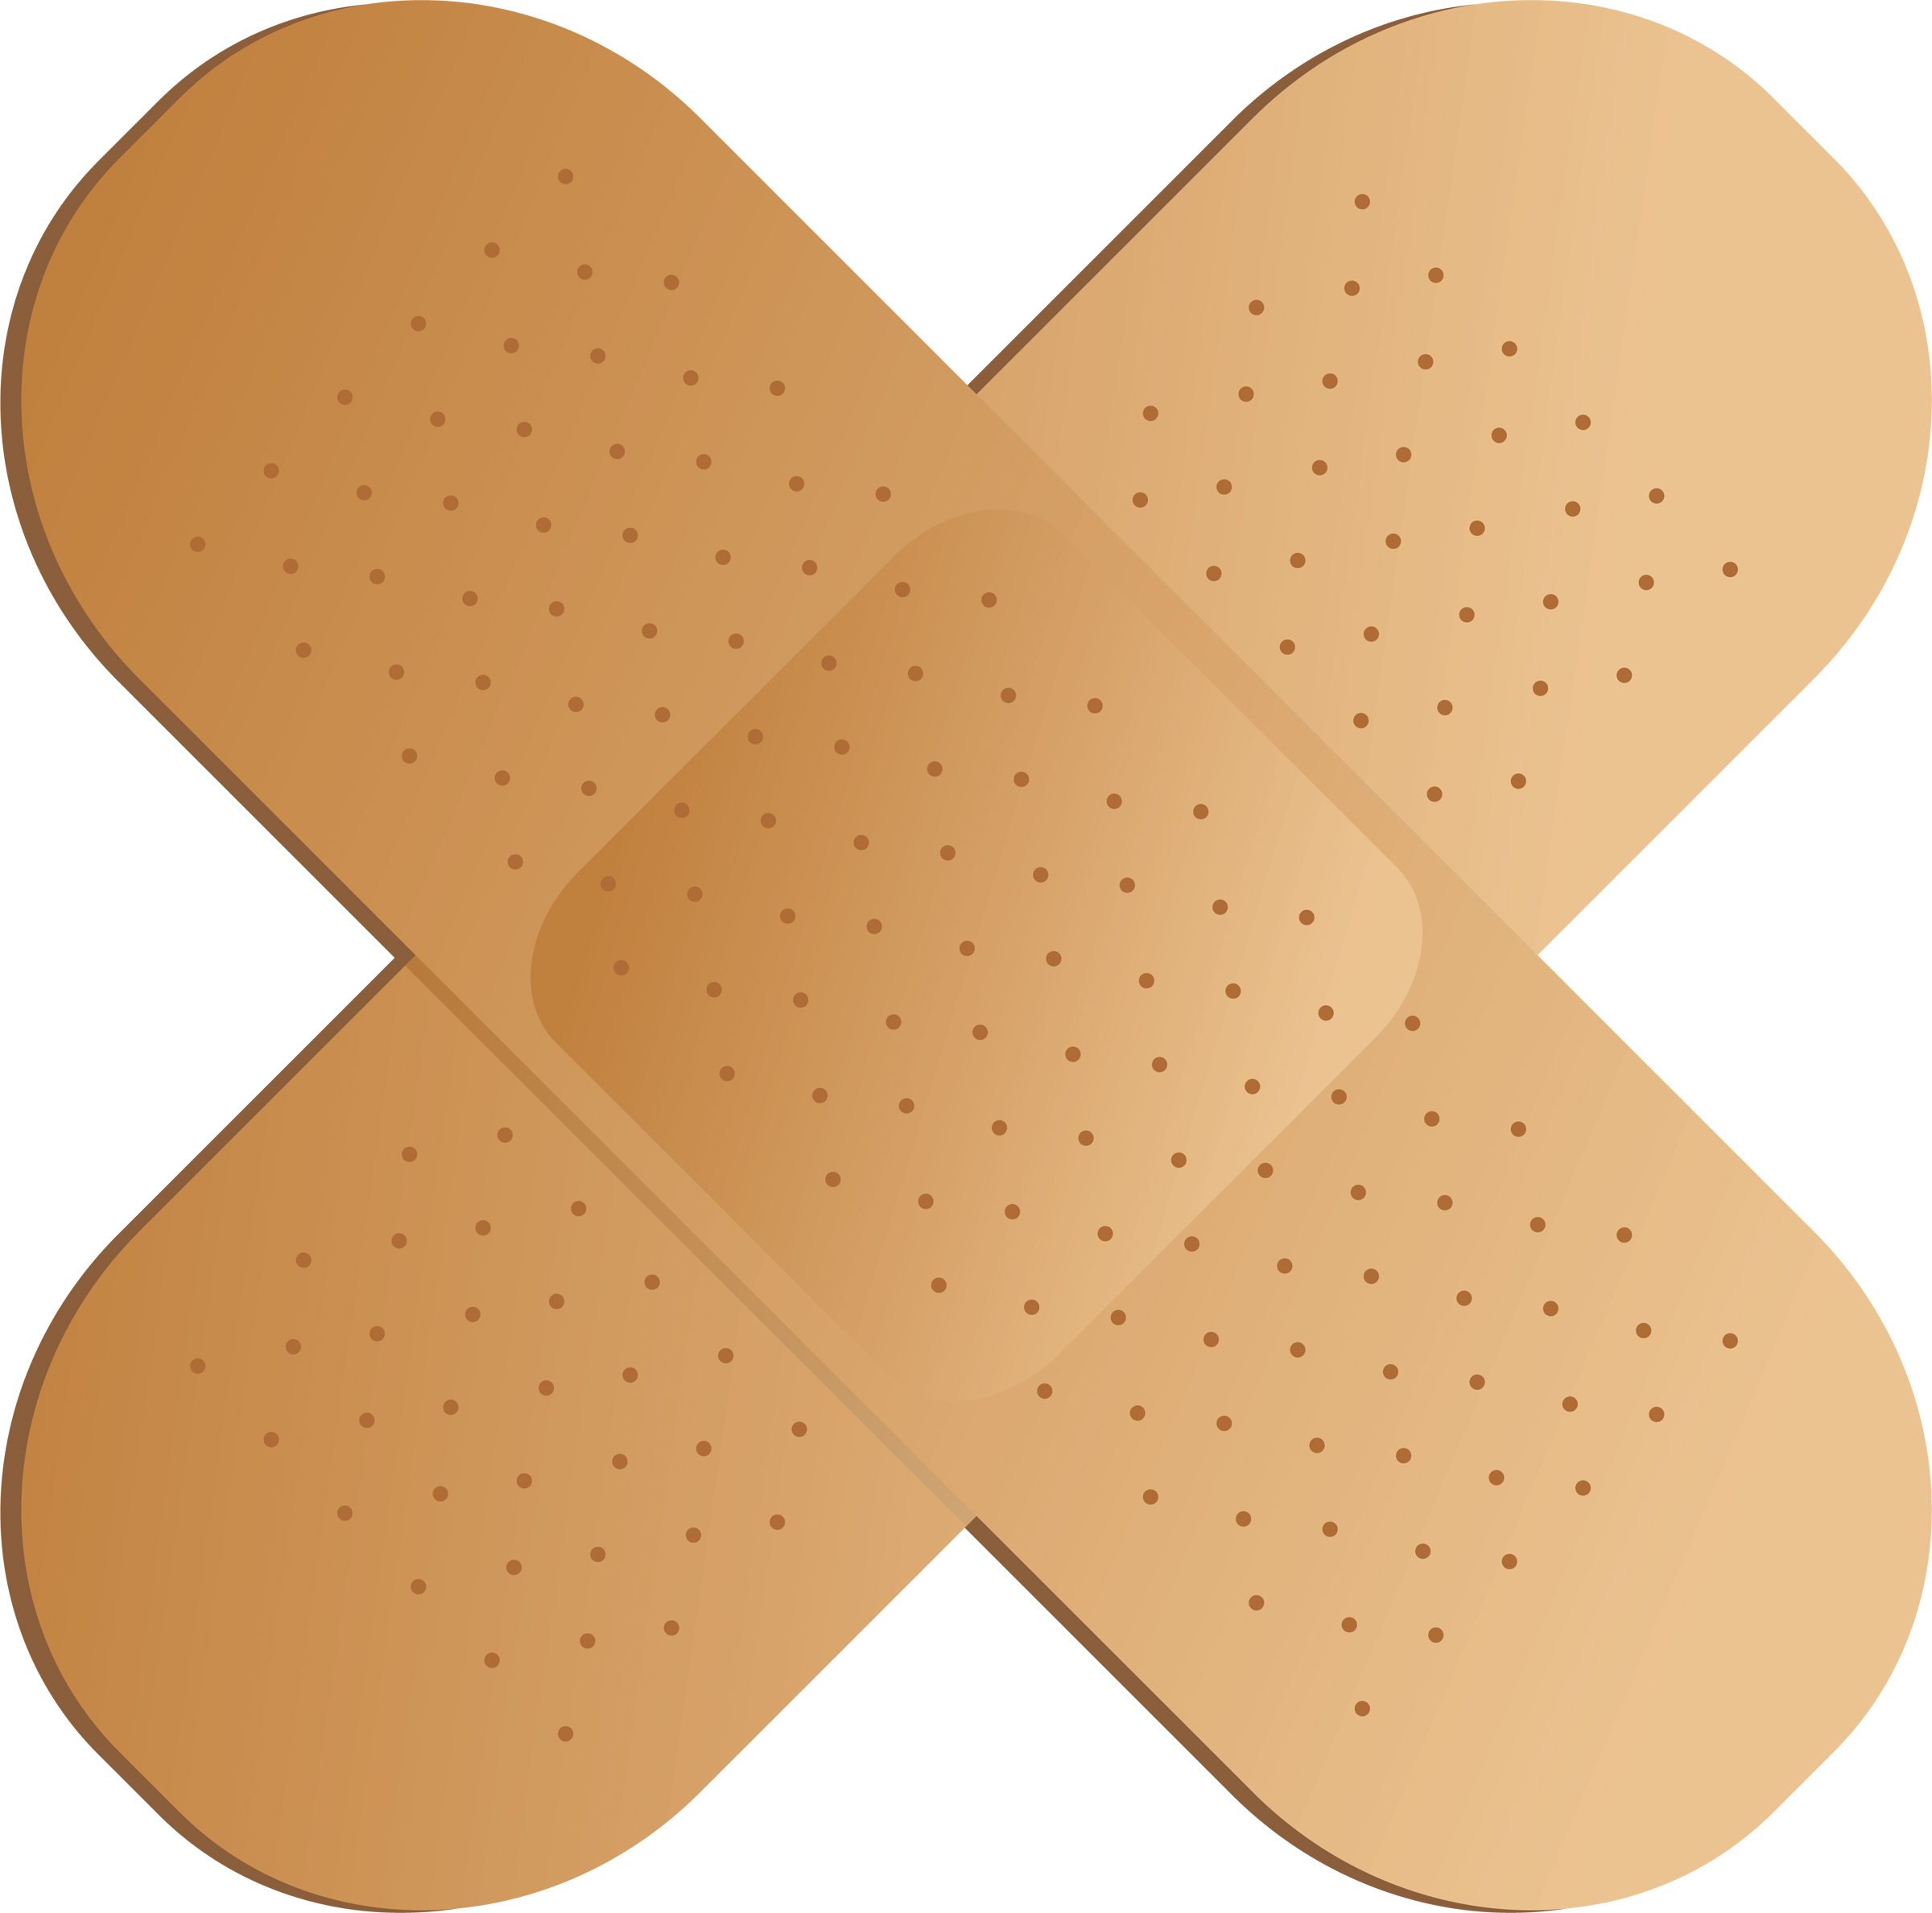 Image of bandaid clipart 9 cl - Clipart Bandaid